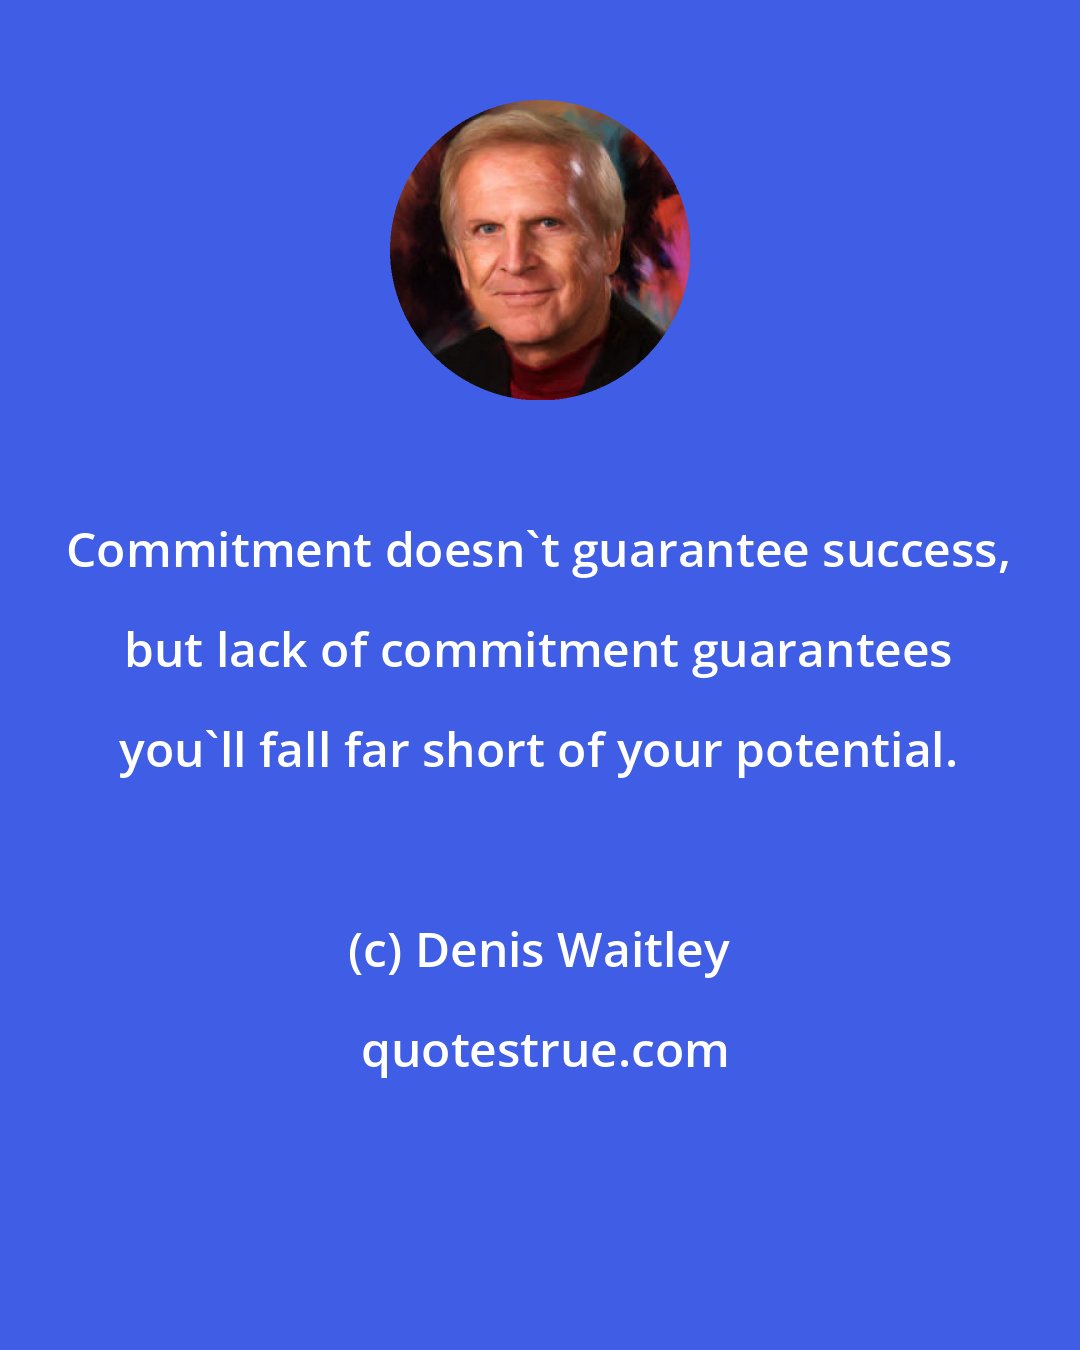 Denis Waitley: Commitment doesn't guarantee success, but lack of commitment guarantees you'll fall far short of your potential.